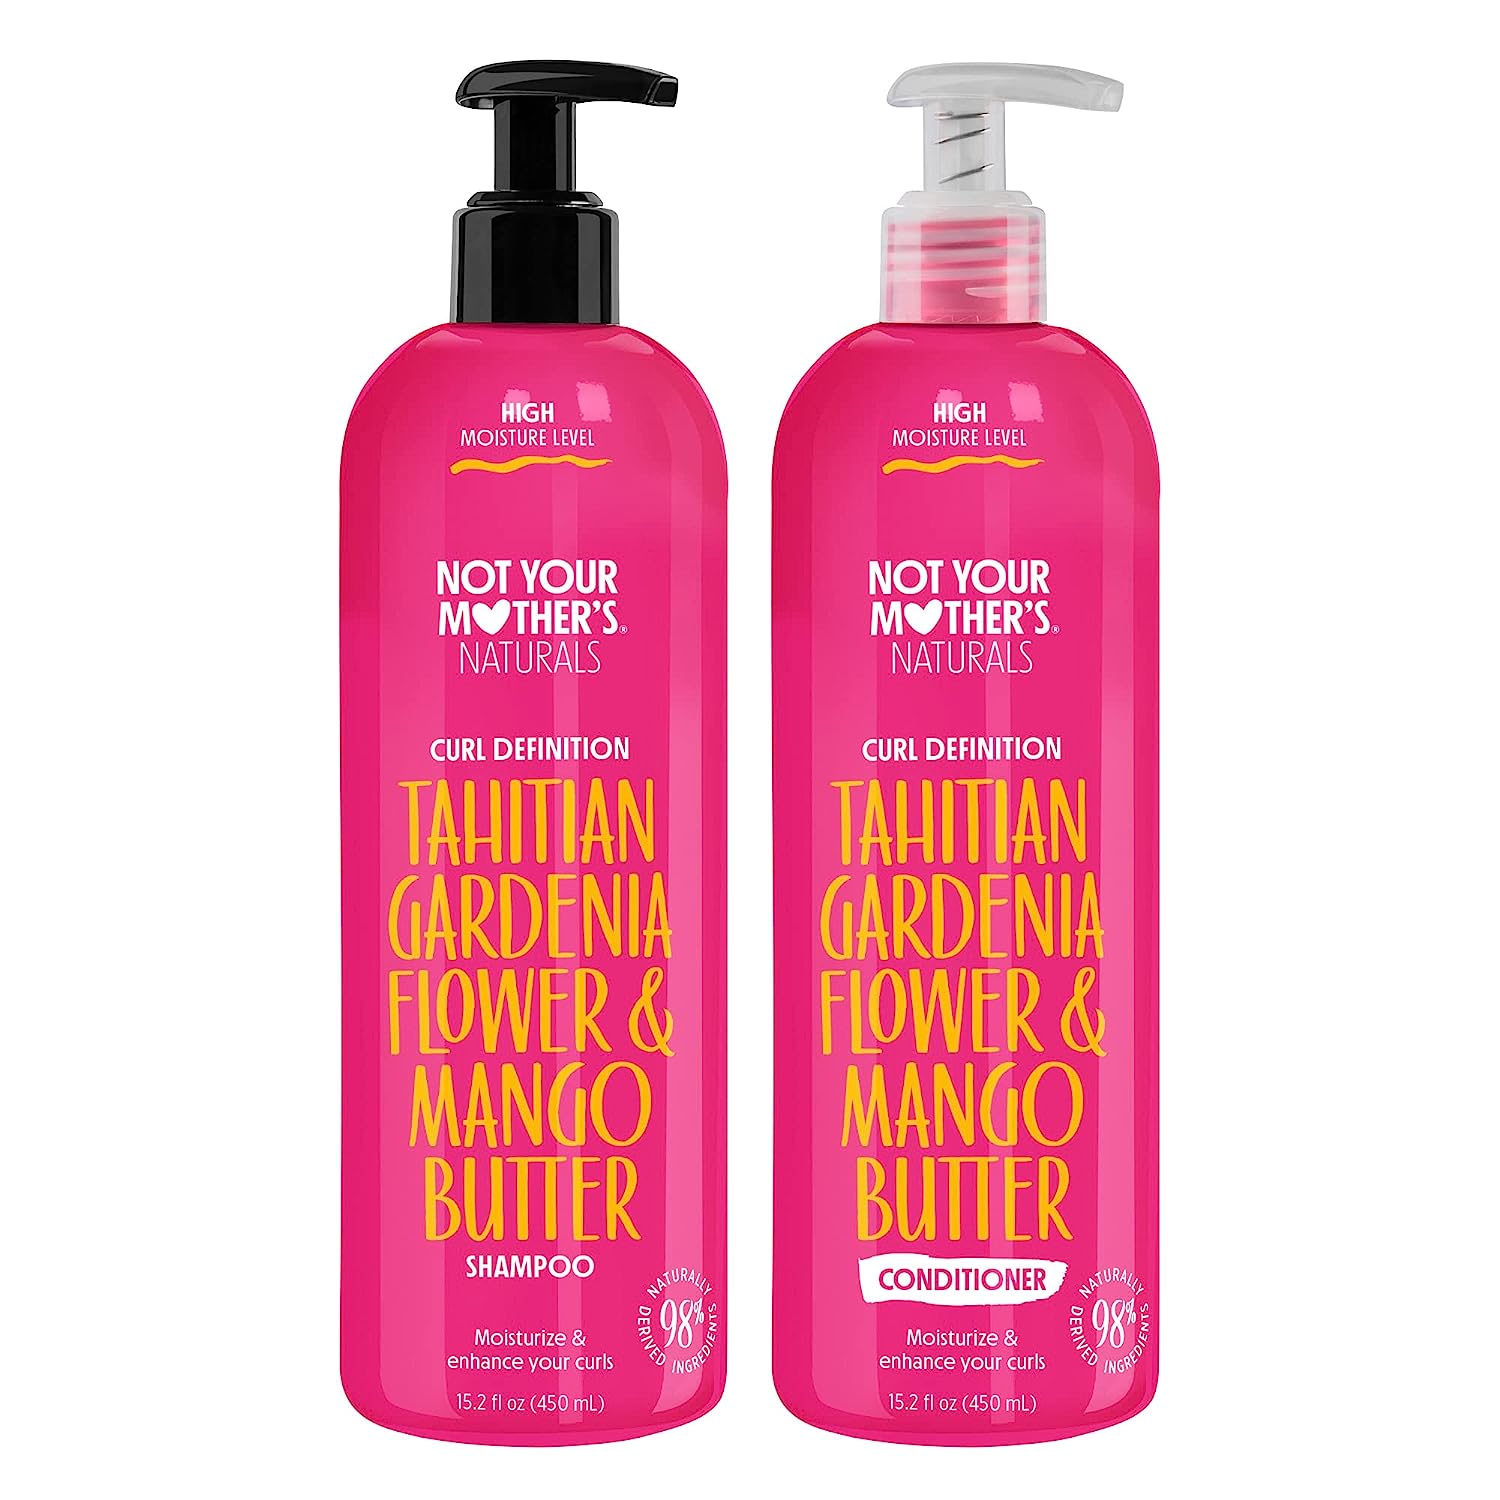 Not Your Mother’s Naturals Shampoo and Conditioner [...]